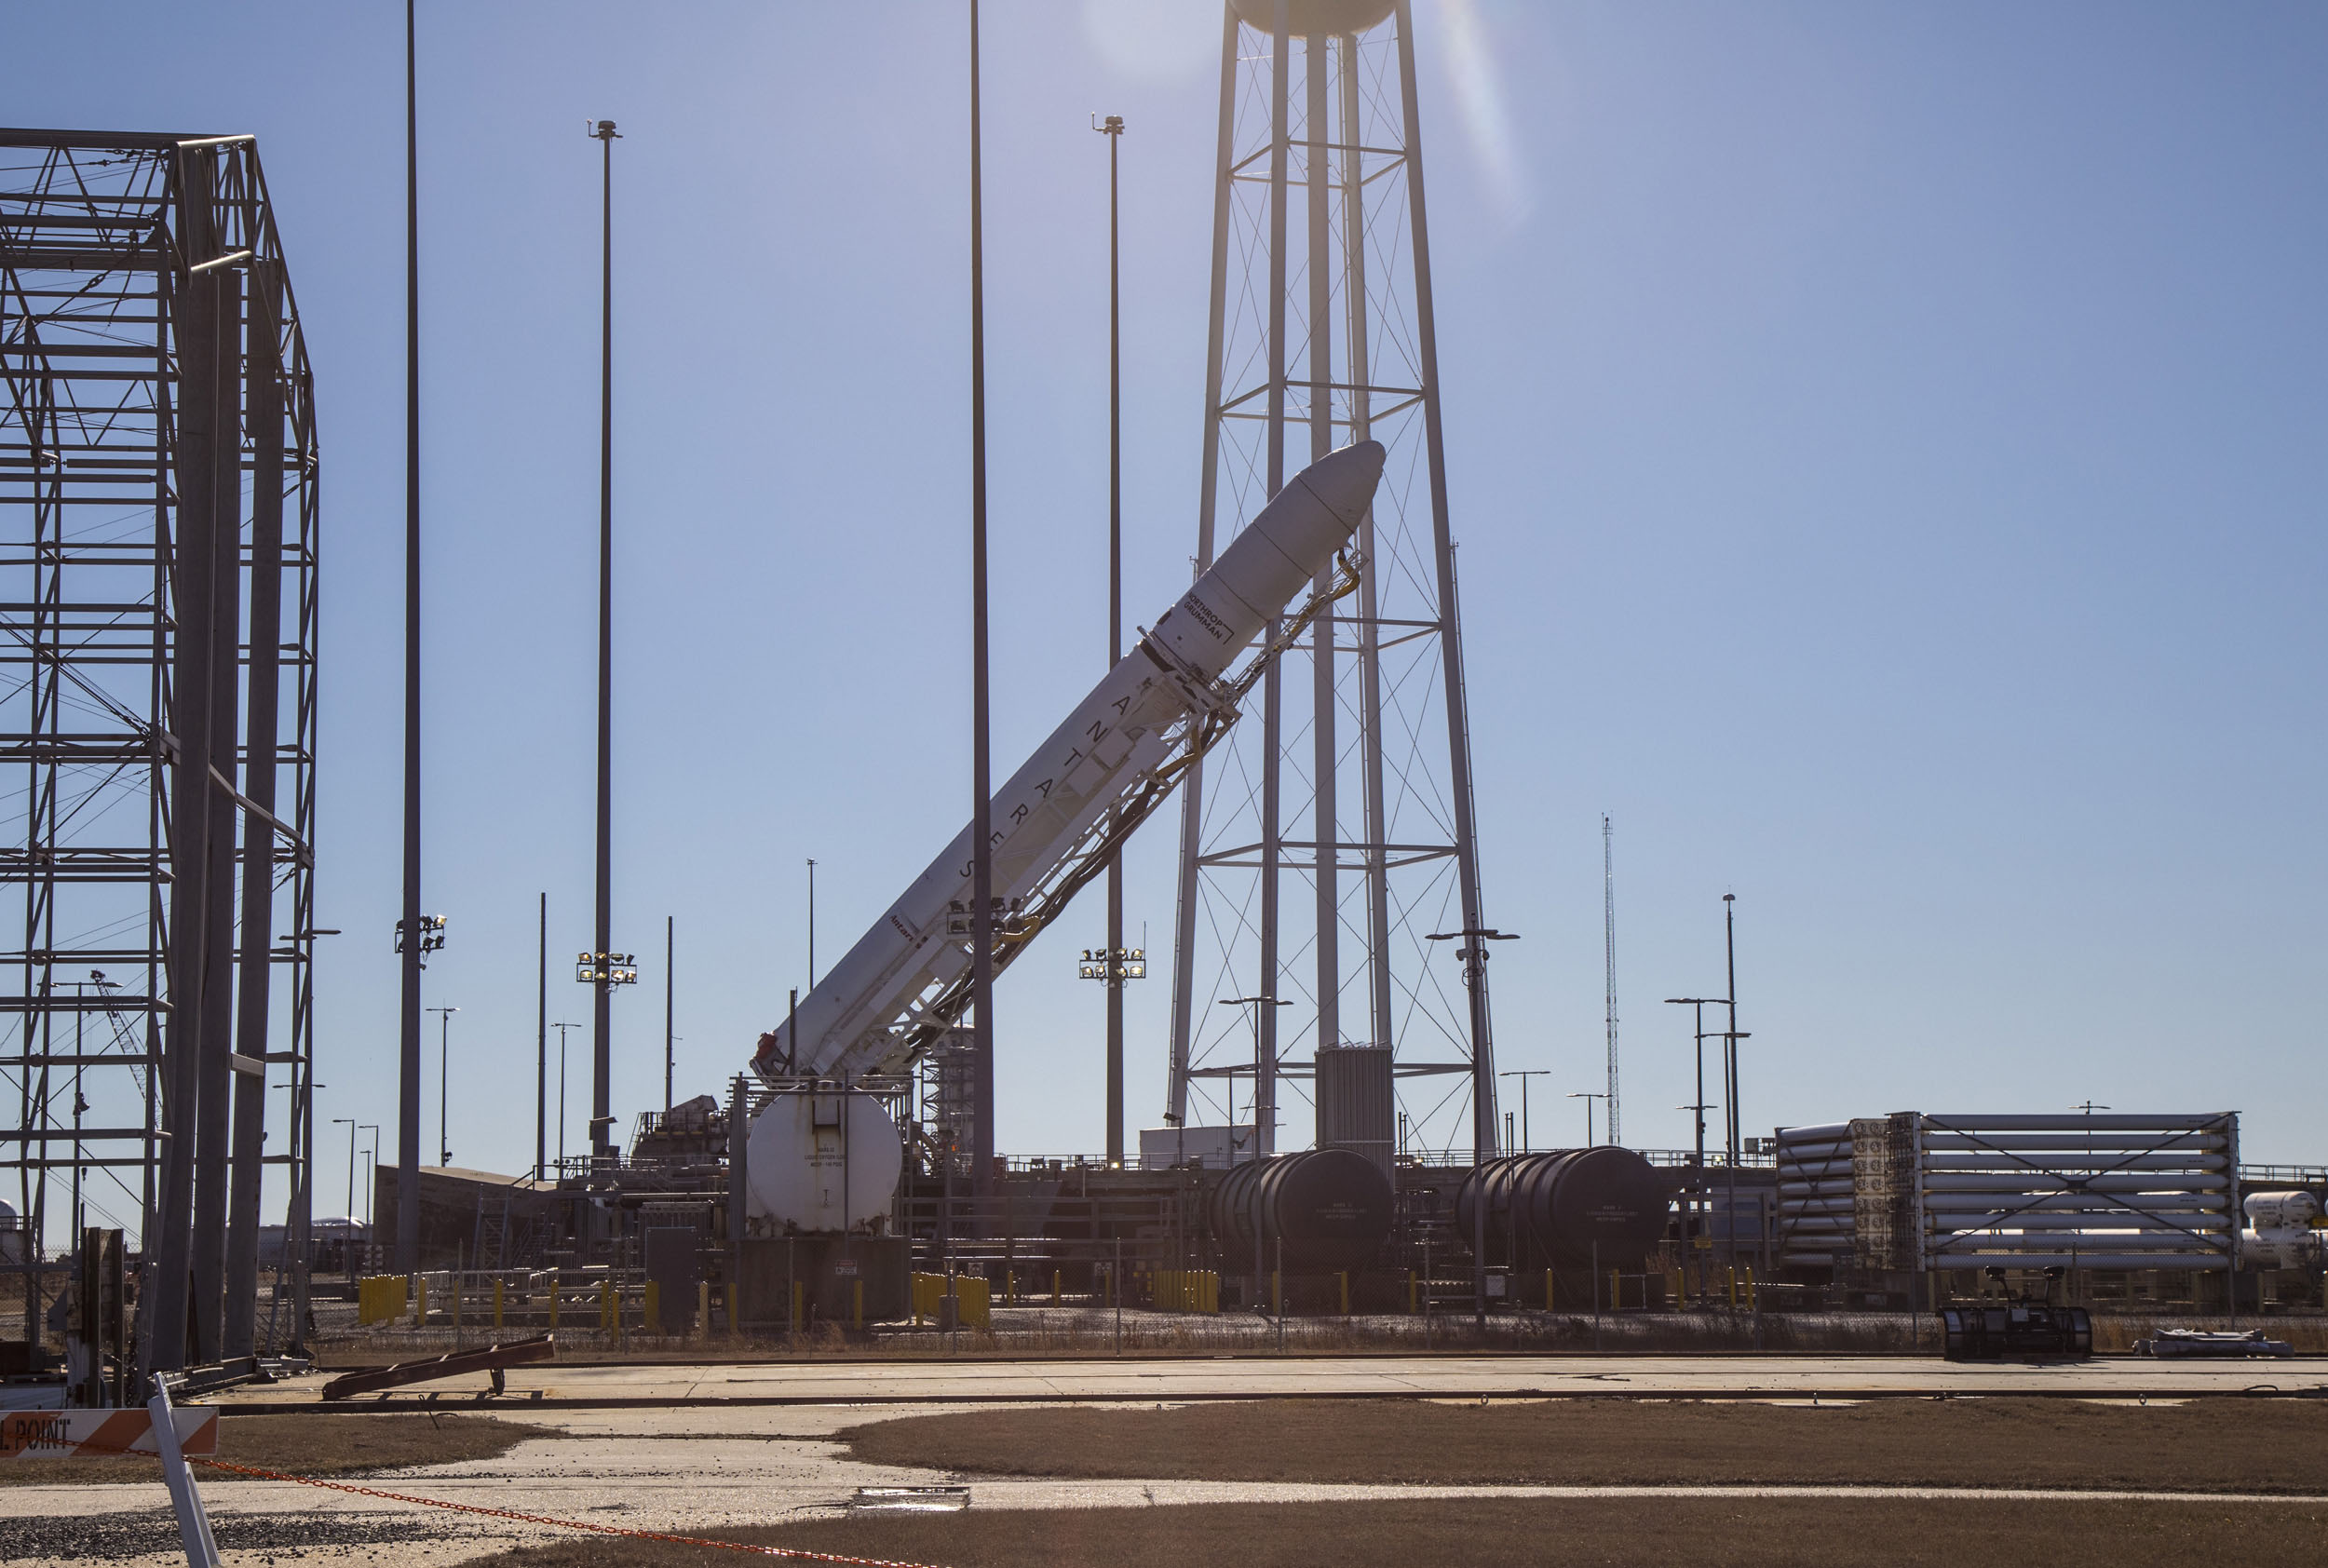 A rocket tilted sideways on launch pad as it is being placed in launch postion in front of a blue sky